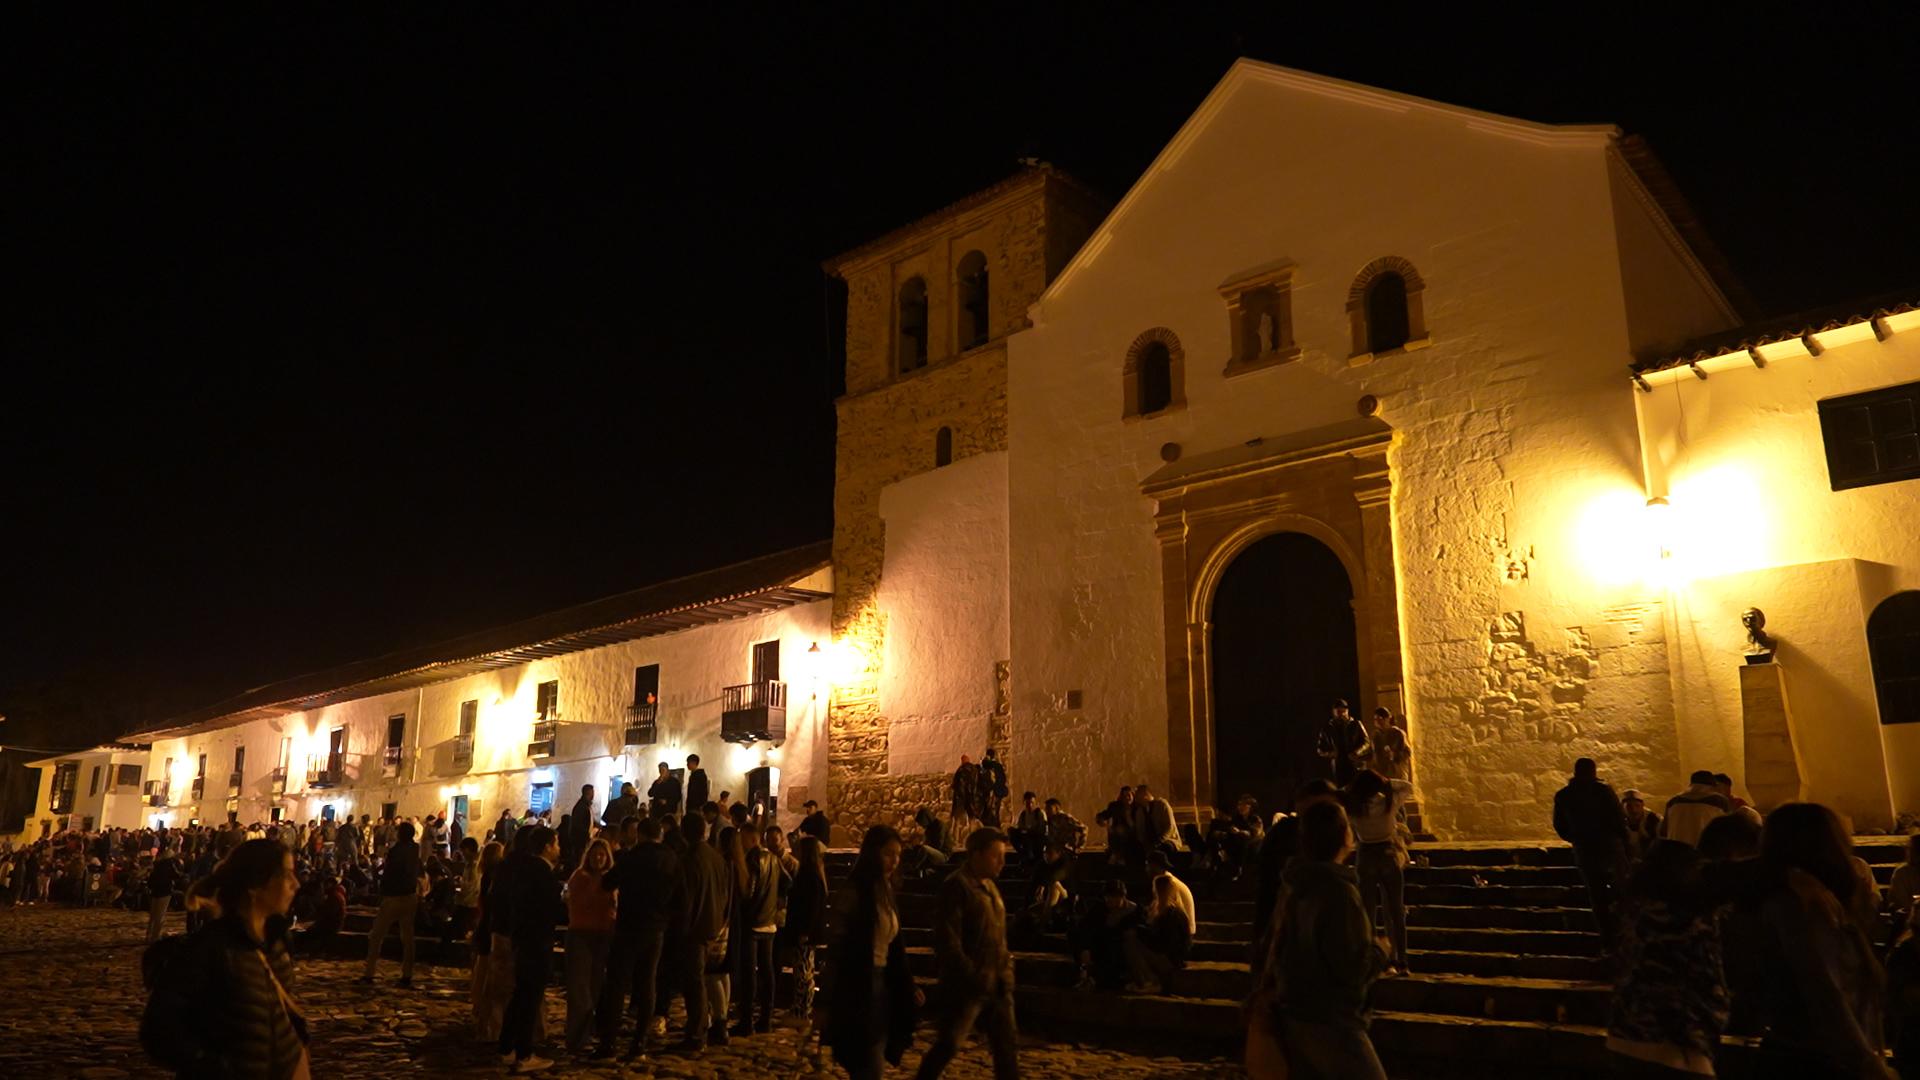 To get certified by the Starlight Foundation, Villa de Leyva, Colombia, plans to change its streetlights so they only point downward and use light bulbs with warmer colored temperatures.